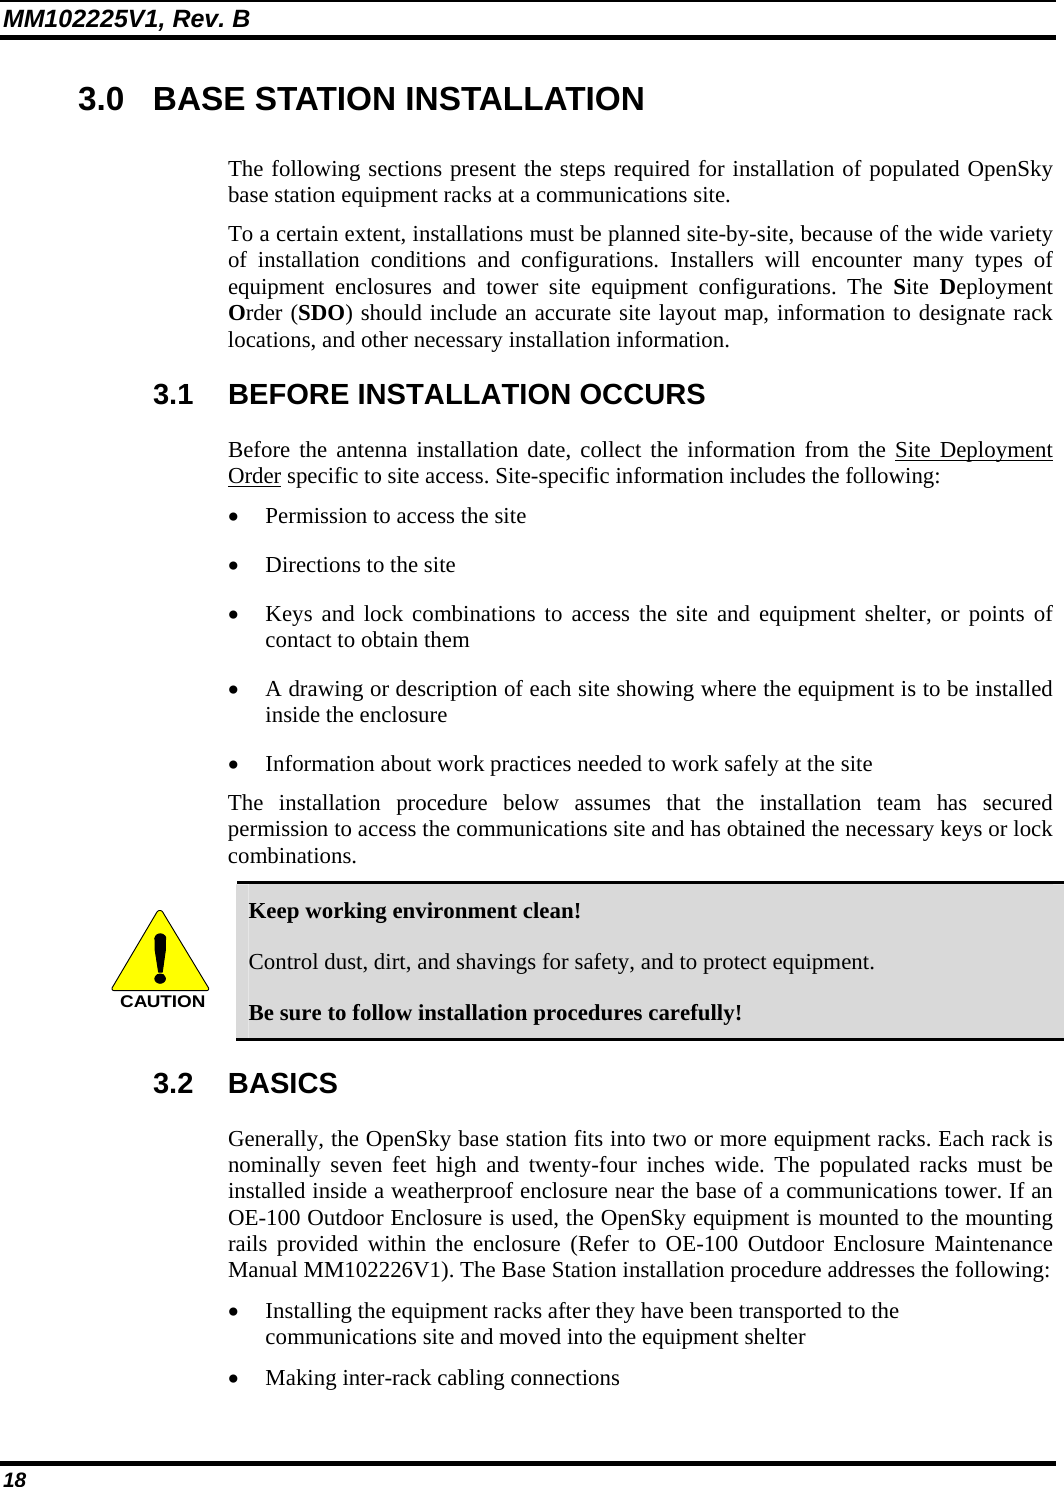 MM102225V1, Rev. B 18 3.0  BASE STATION INSTALLATION The following sections present the steps required for installation of populated OpenSky base station equipment racks at a communications site. To a certain extent, installations must be planned site-by-site, because of the wide variety of installation conditions and configurations. Installers will encounter many types of equipment enclosures and tower site equipment configurations. The Site  Deployment Order (SDO) should include an accurate site layout map, information to designate rack locations, and other necessary installation information. 3.1 BEFORE INSTALLATION OCCURS Before the antenna installation date, collect the information from the Site Deployment Order specific to site access. Site-specific information includes the following: • Permission to access the site • Directions to the site • Keys and lock combinations to access the site and equipment shelter, or points of contact to obtain them • A drawing or description of each site showing where the equipment is to be installed inside the enclosure • Information about work practices needed to work safely at the site The installation procedure below assumes that the installation team has secured permission to access the communications site and has obtained the necessary keys or lock combinations. CAUTION Keep working environment clean! Control dust, dirt, and shavings for safety, and to protect equipment. Be sure to follow installation procedures carefully! 3.2 BASICS Generally, the OpenSky base station fits into two or more equipment racks. Each rack is nominally seven feet high and twenty-four inches wide. The populated racks must be installed inside a weatherproof enclosure near the base of a communications tower. If an OE-100 Outdoor Enclosure is used, the OpenSky equipment is mounted to the mounting rails provided within the enclosure (Refer to OE-100 Outdoor Enclosure Maintenance Manual MM102226V1). The Base Station installation procedure addresses the following: • Installing the equipment racks after they have been transported to the communications site and moved into the equipment shelter • Making inter-rack cabling connections 